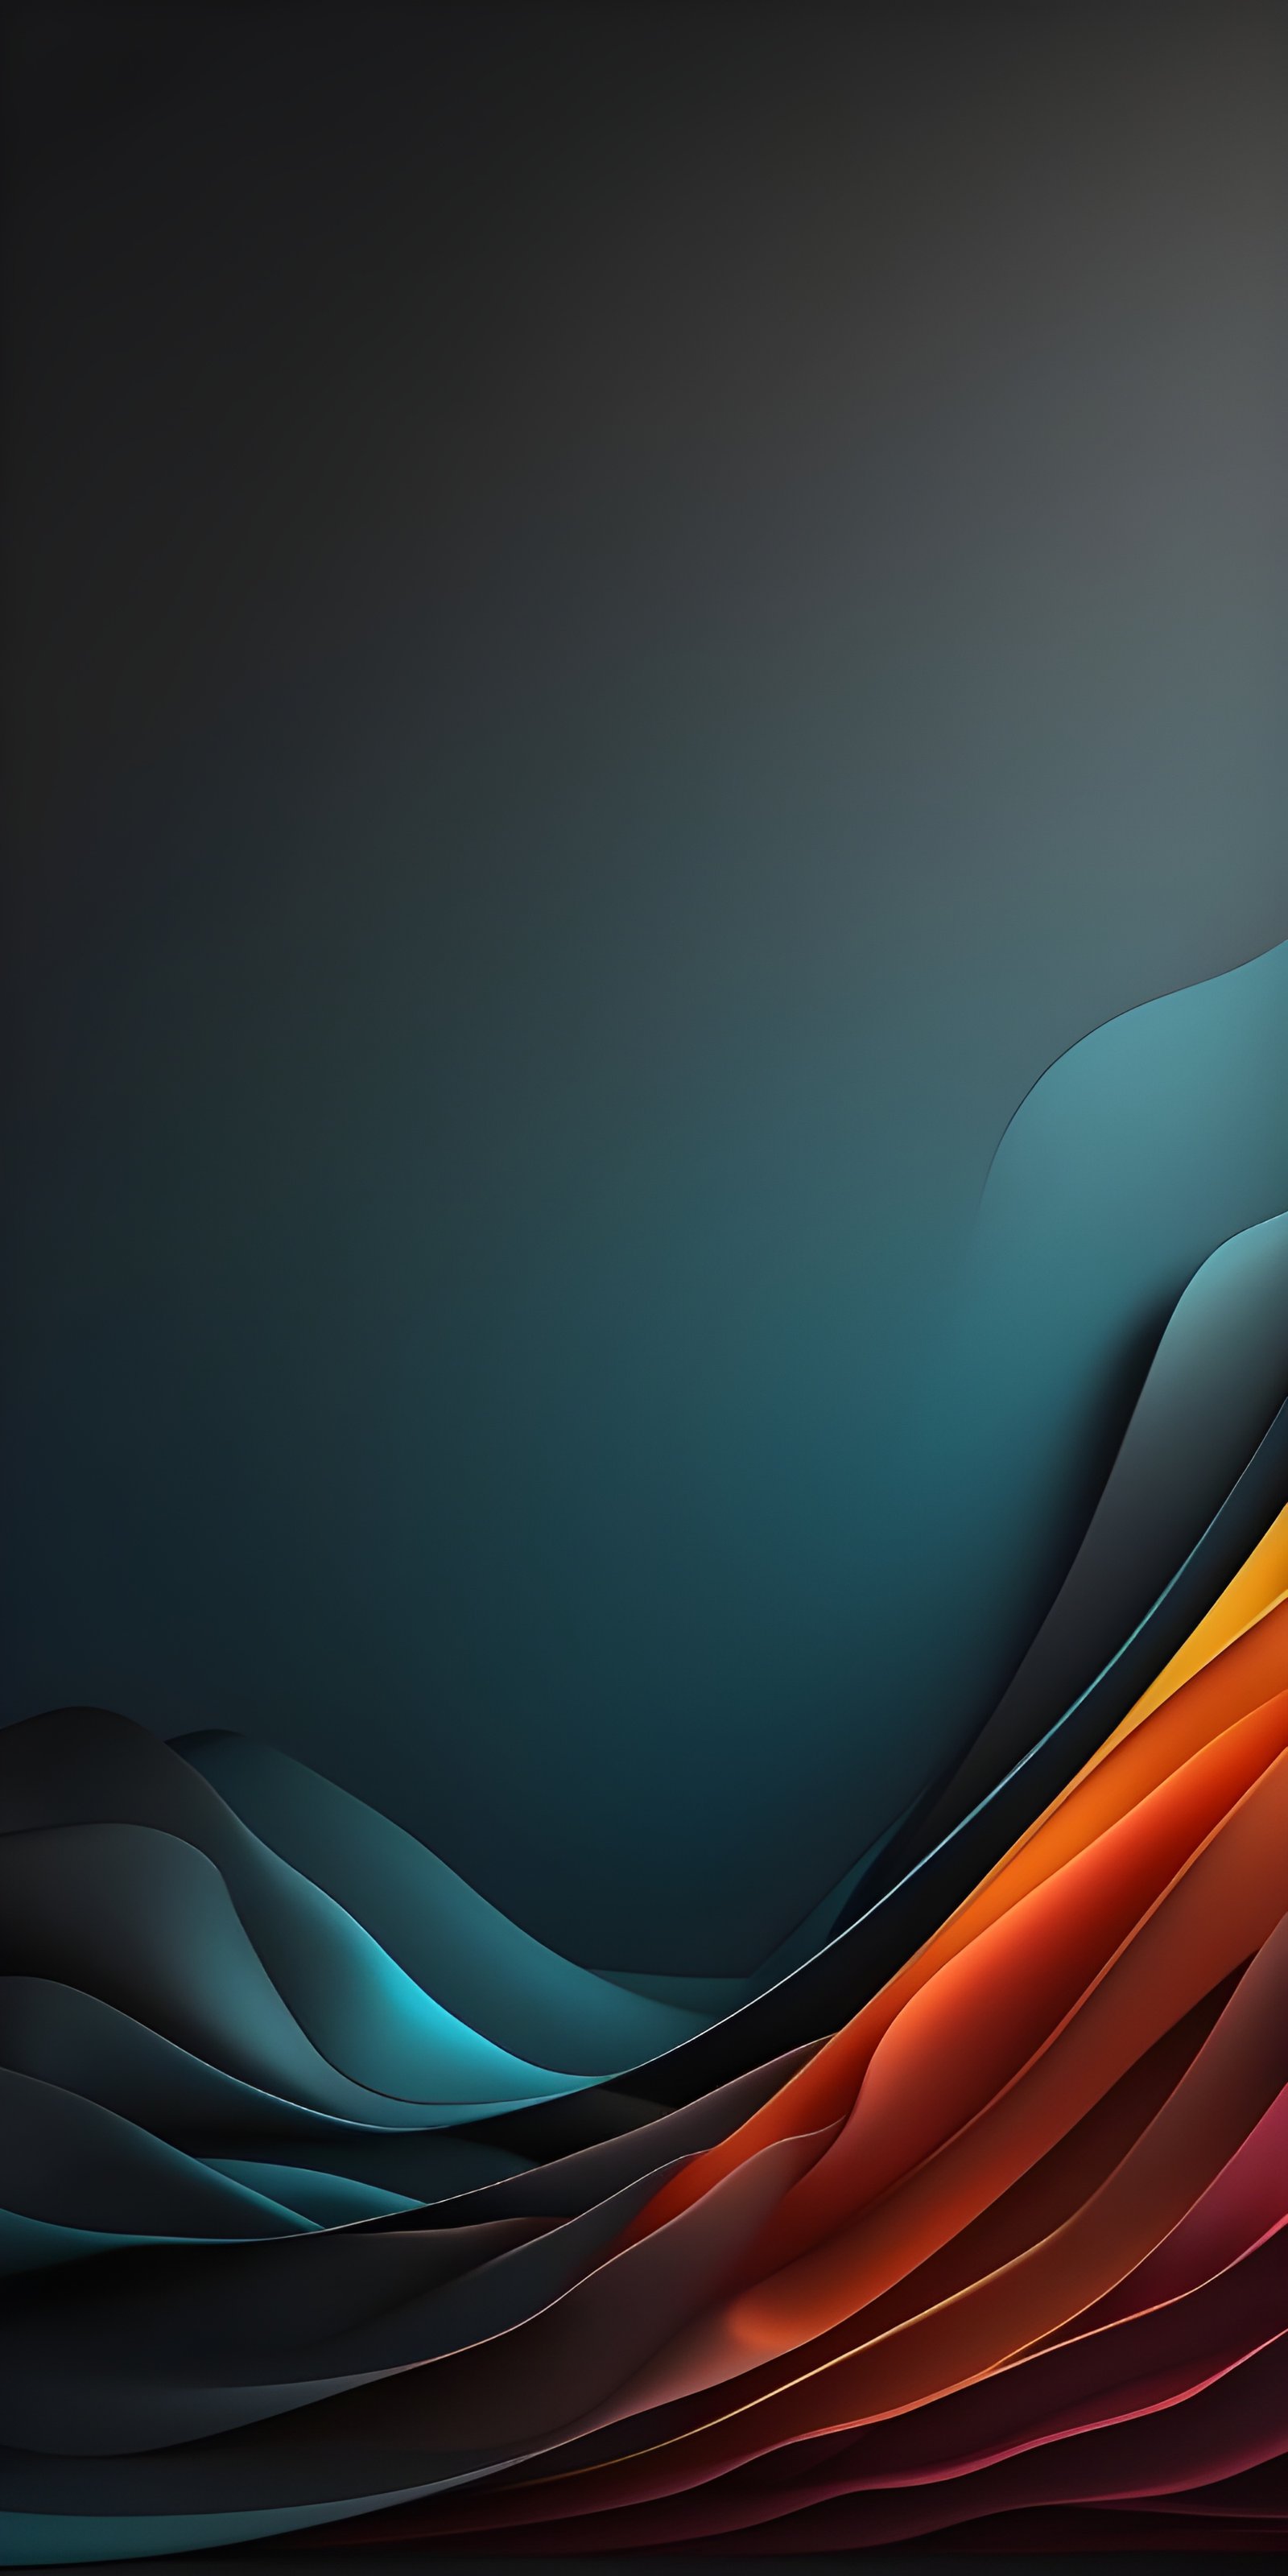 Abstract Blue, Orange and Black Phone Wallpaper